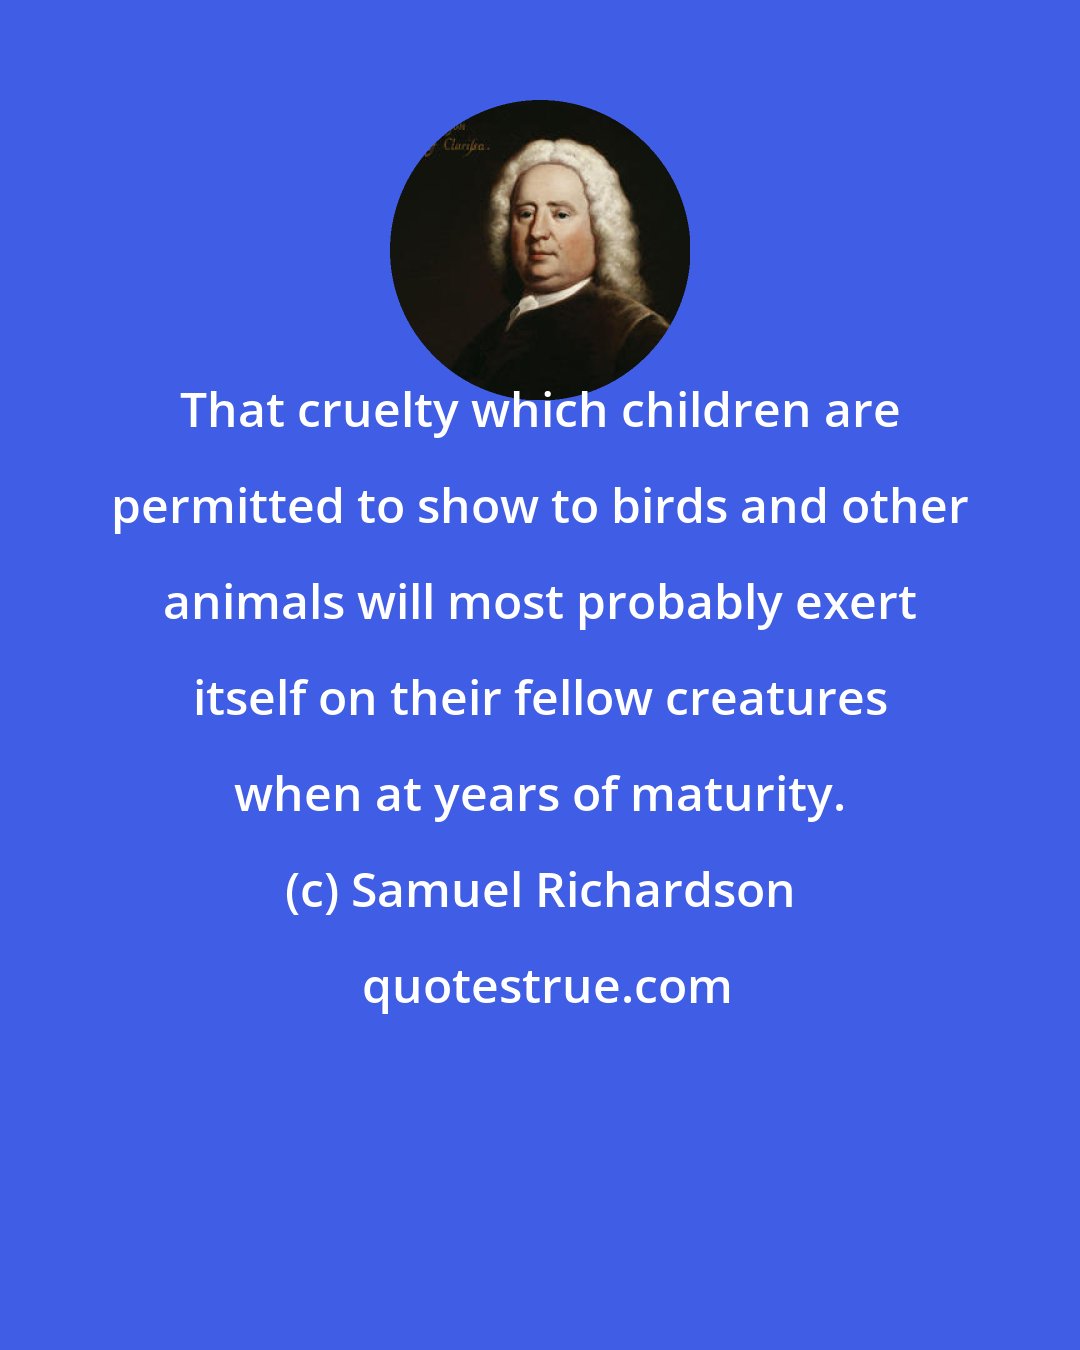 Samuel Richardson: That cruelty which children are permitted to show to birds and other animals will most probably exert itself on their fellow creatures when at years of maturity.